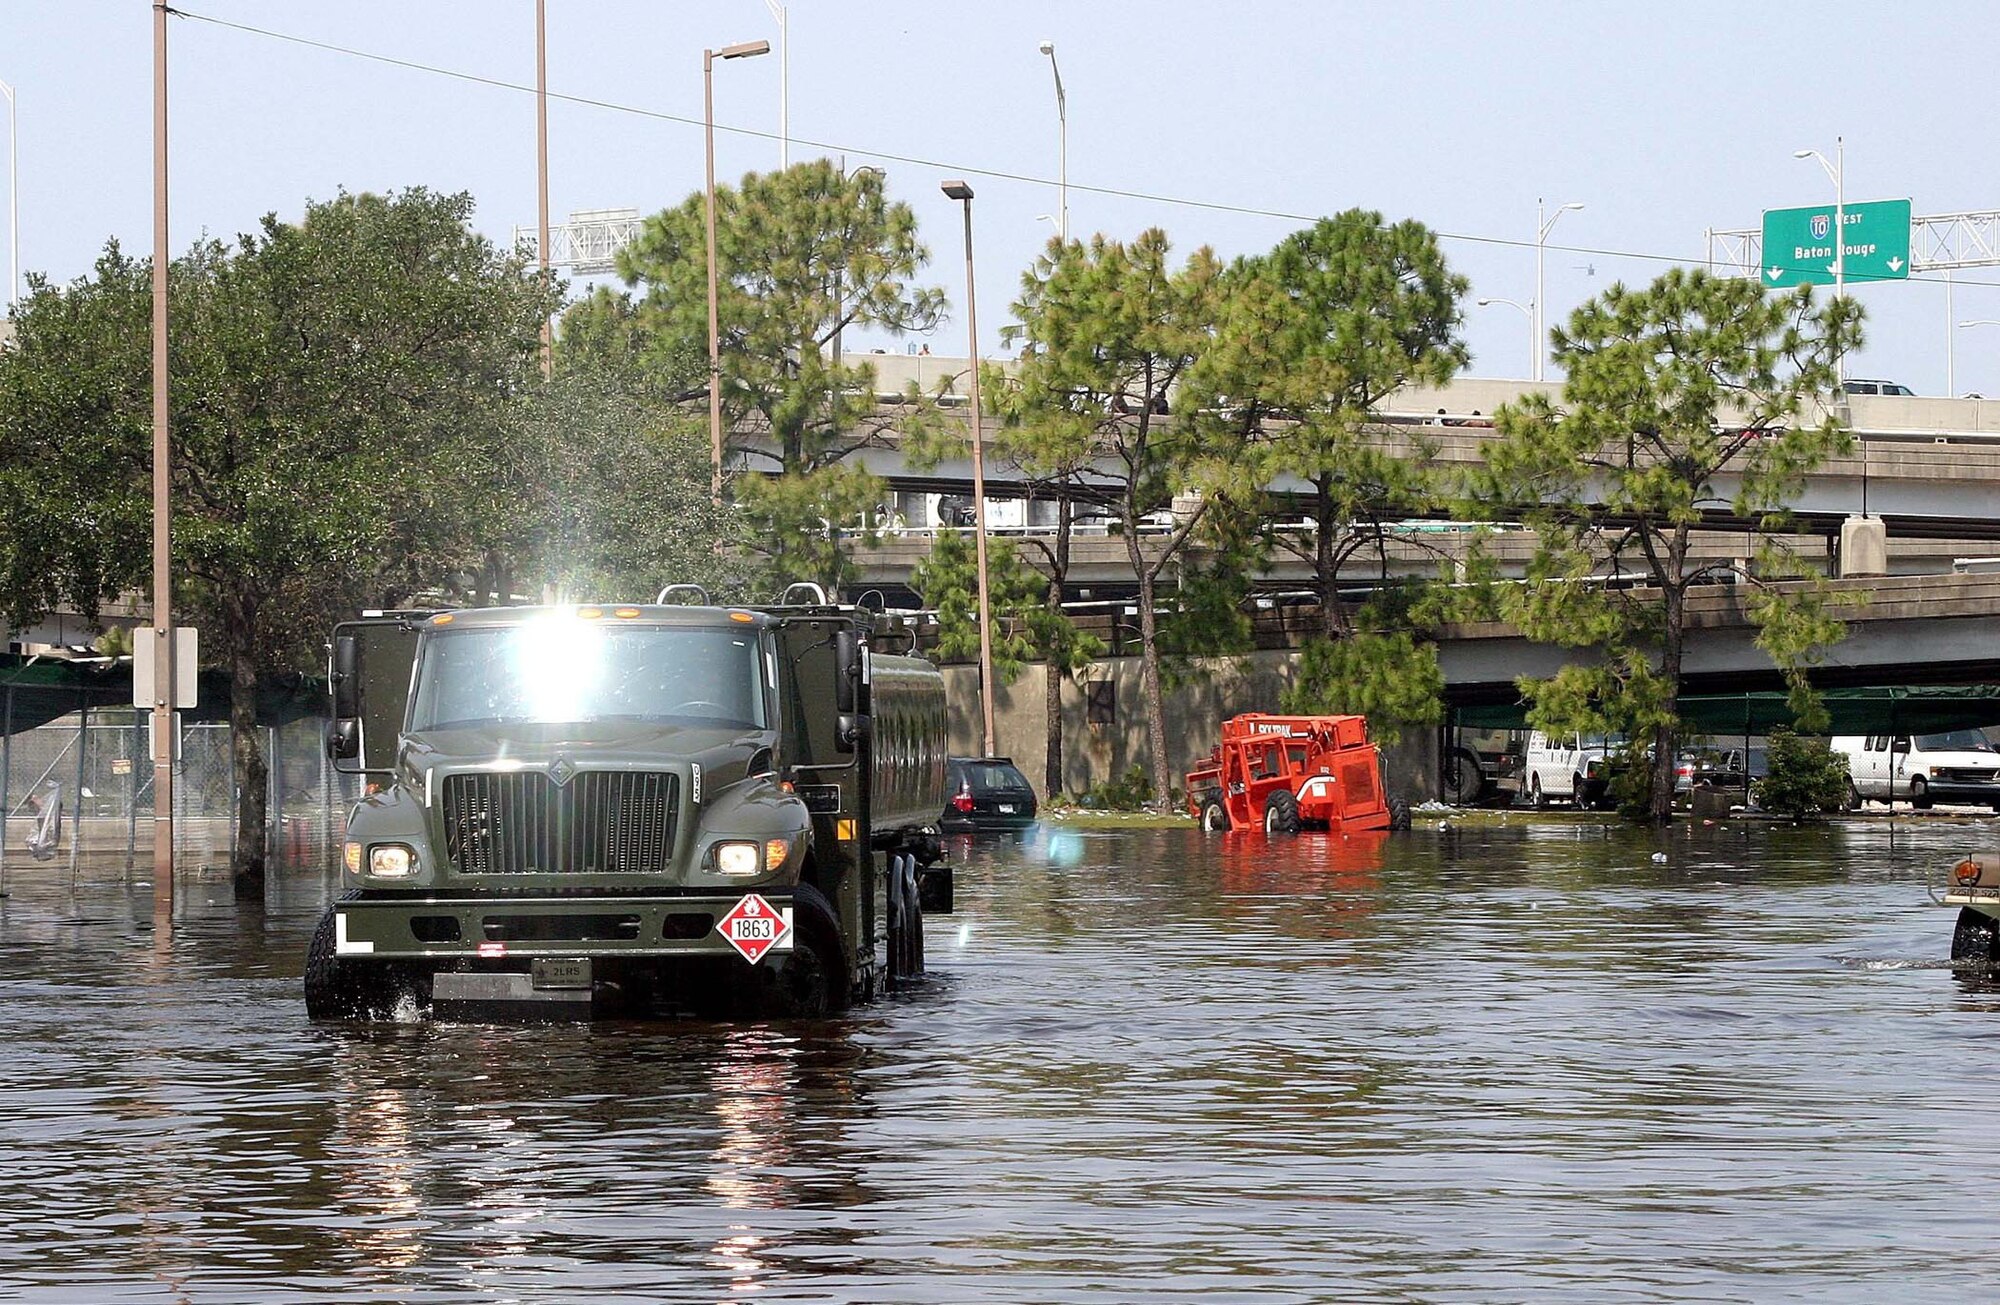 NEW ORLEANS -- An R-11 jet fuel truck drives through the flooded streets here to its operating location.  A fuels team from Barksdale Air Force Base, La., deployed here to assist with refueling operations in the city, to include refueling generators and stranded vehicles.  (U.S. Air Force photo)